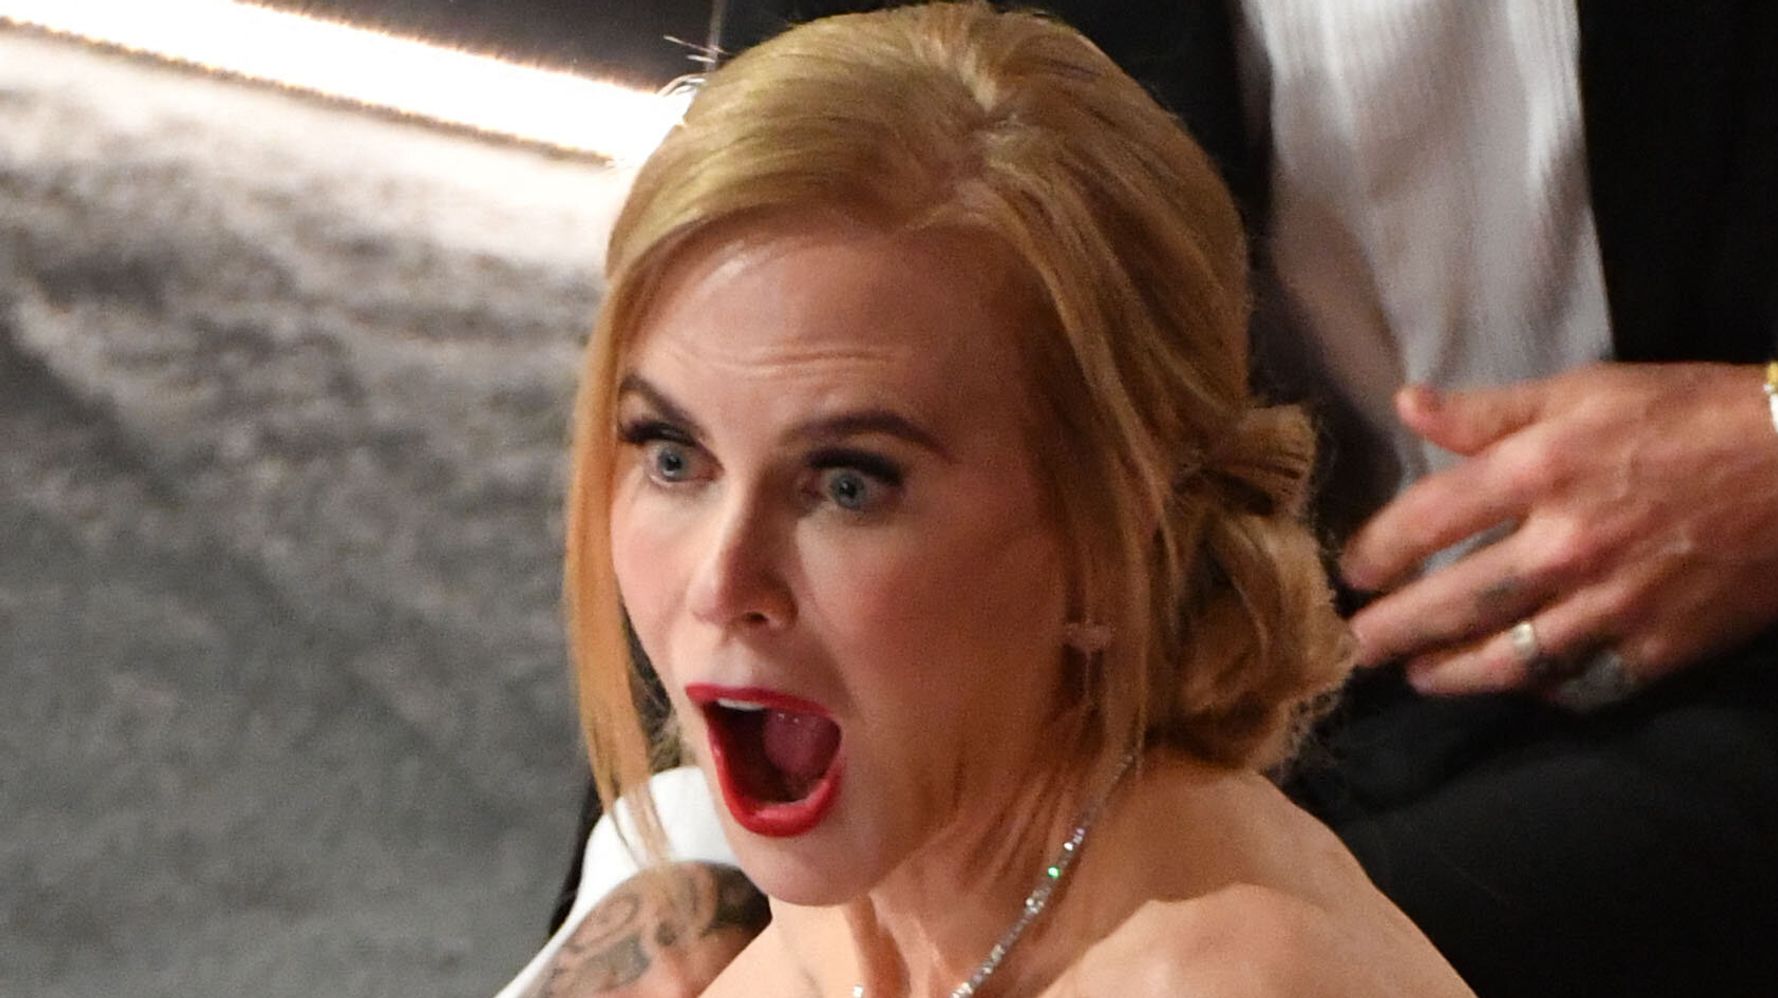 Nicole kidman with a shocked face and open mouth